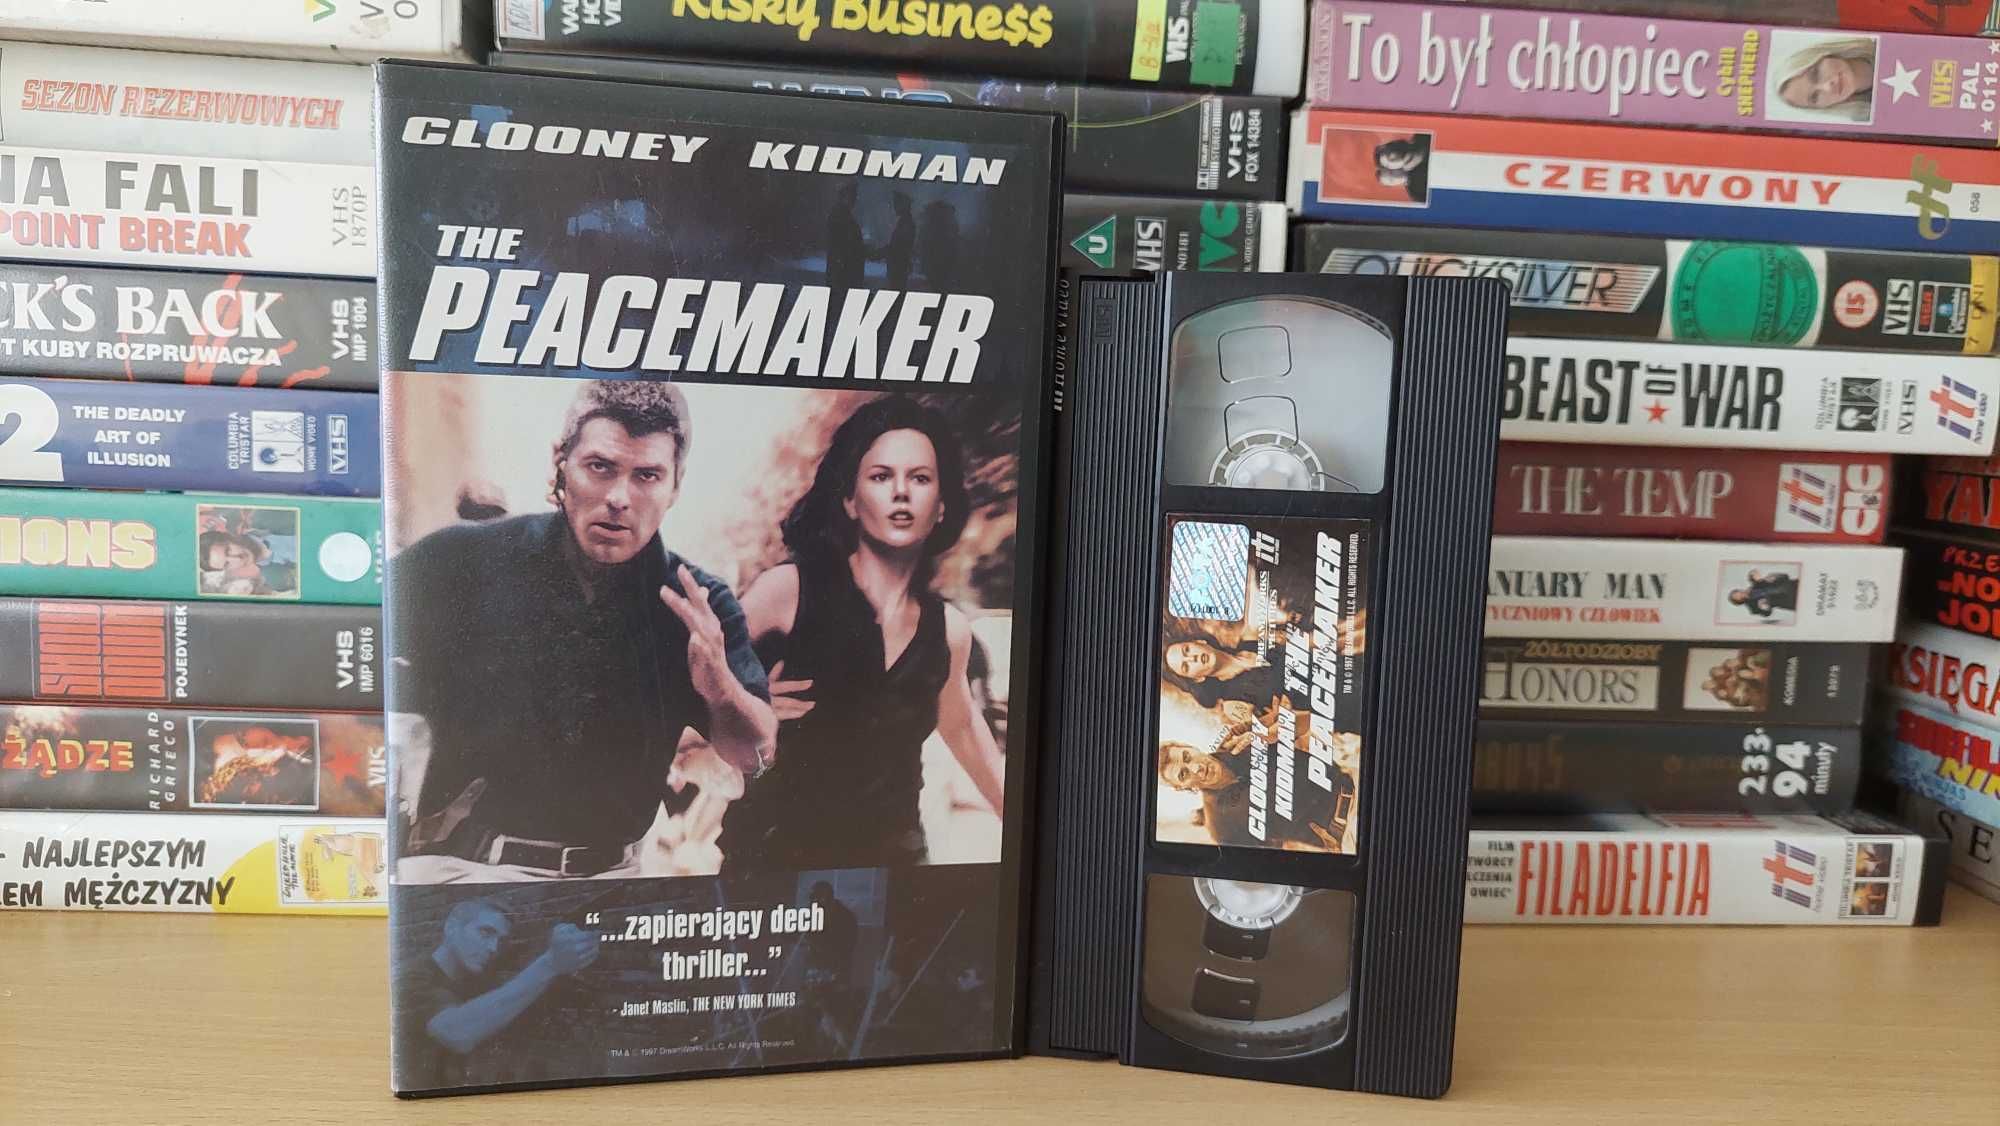 Peacemaker - (The Peacemaker) - VHS